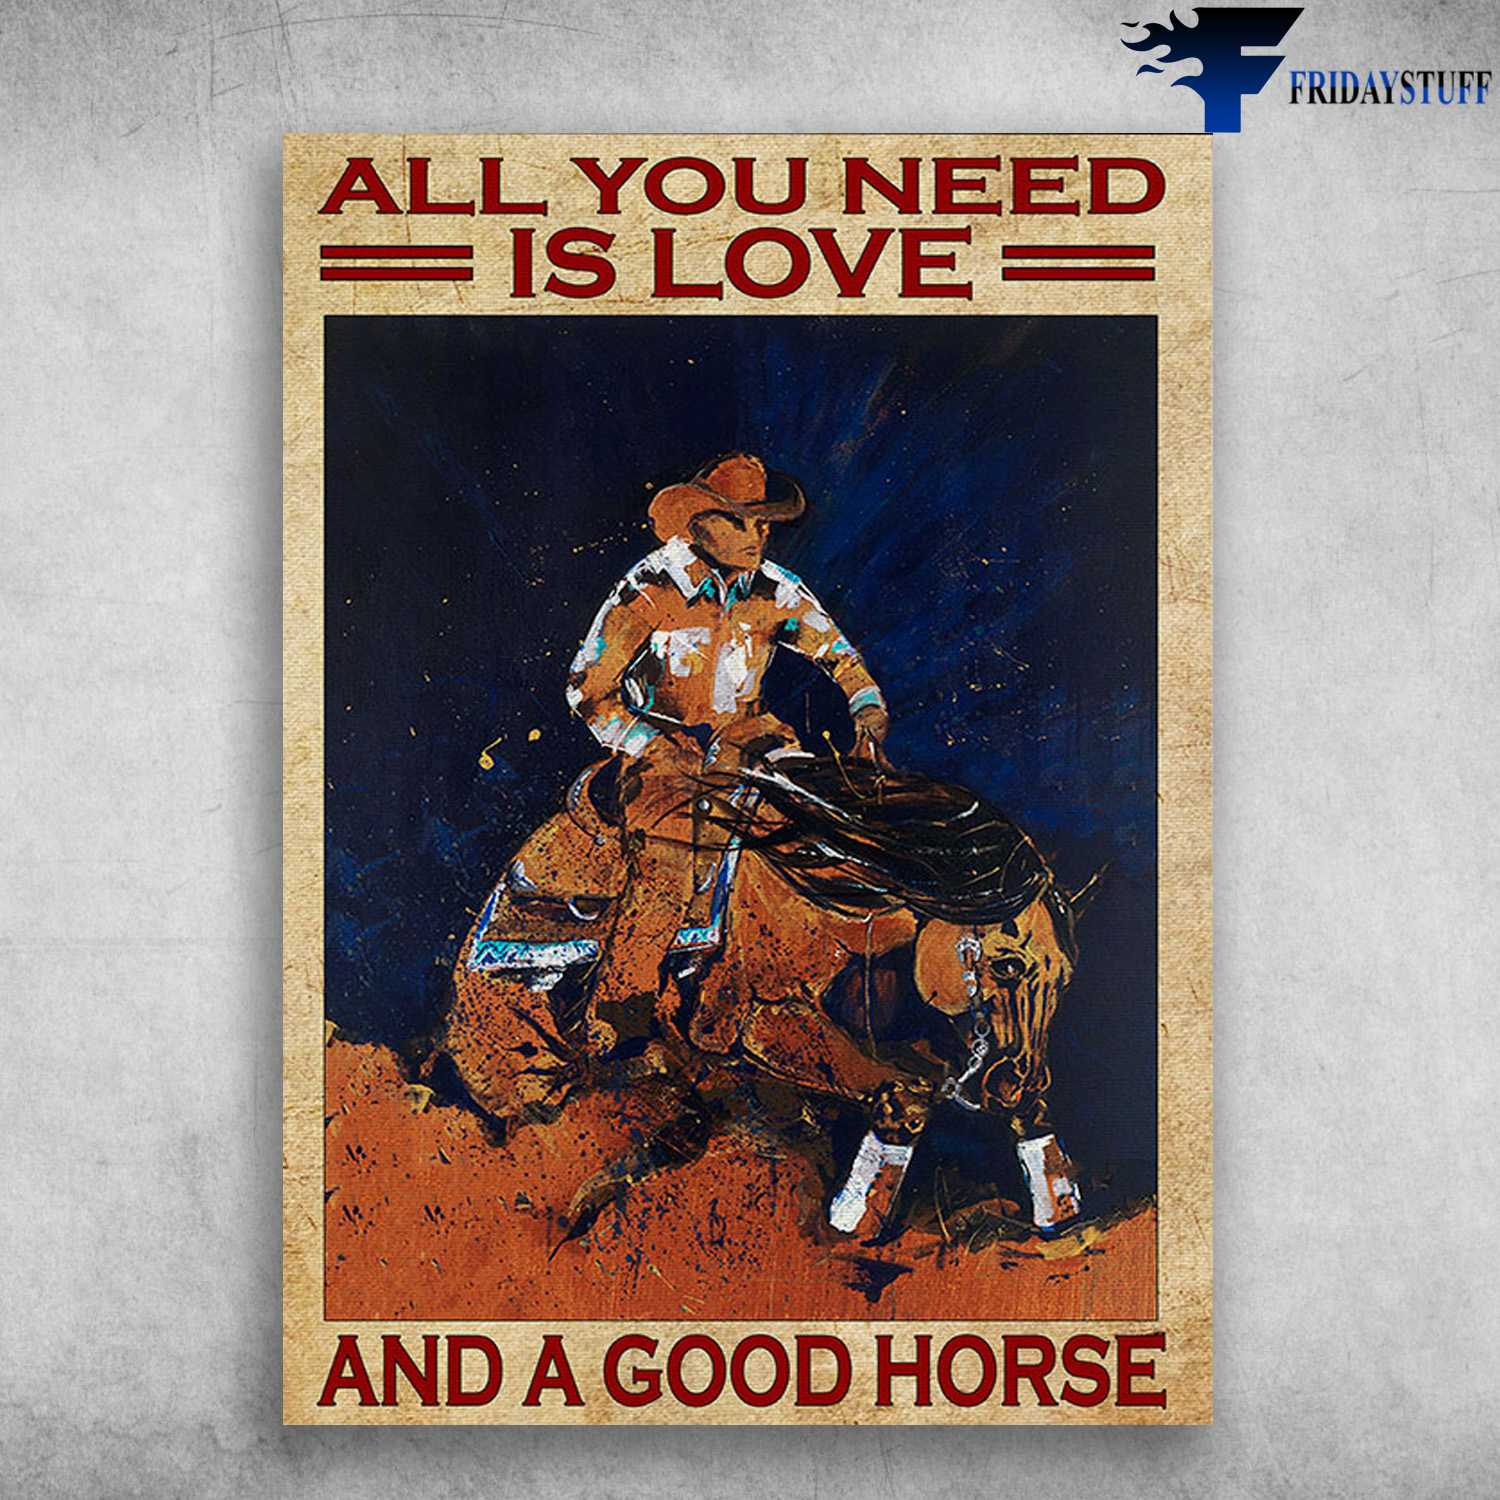 Cowboy Riding, Horse Riding - All You Need Is Love, And A Good Horse